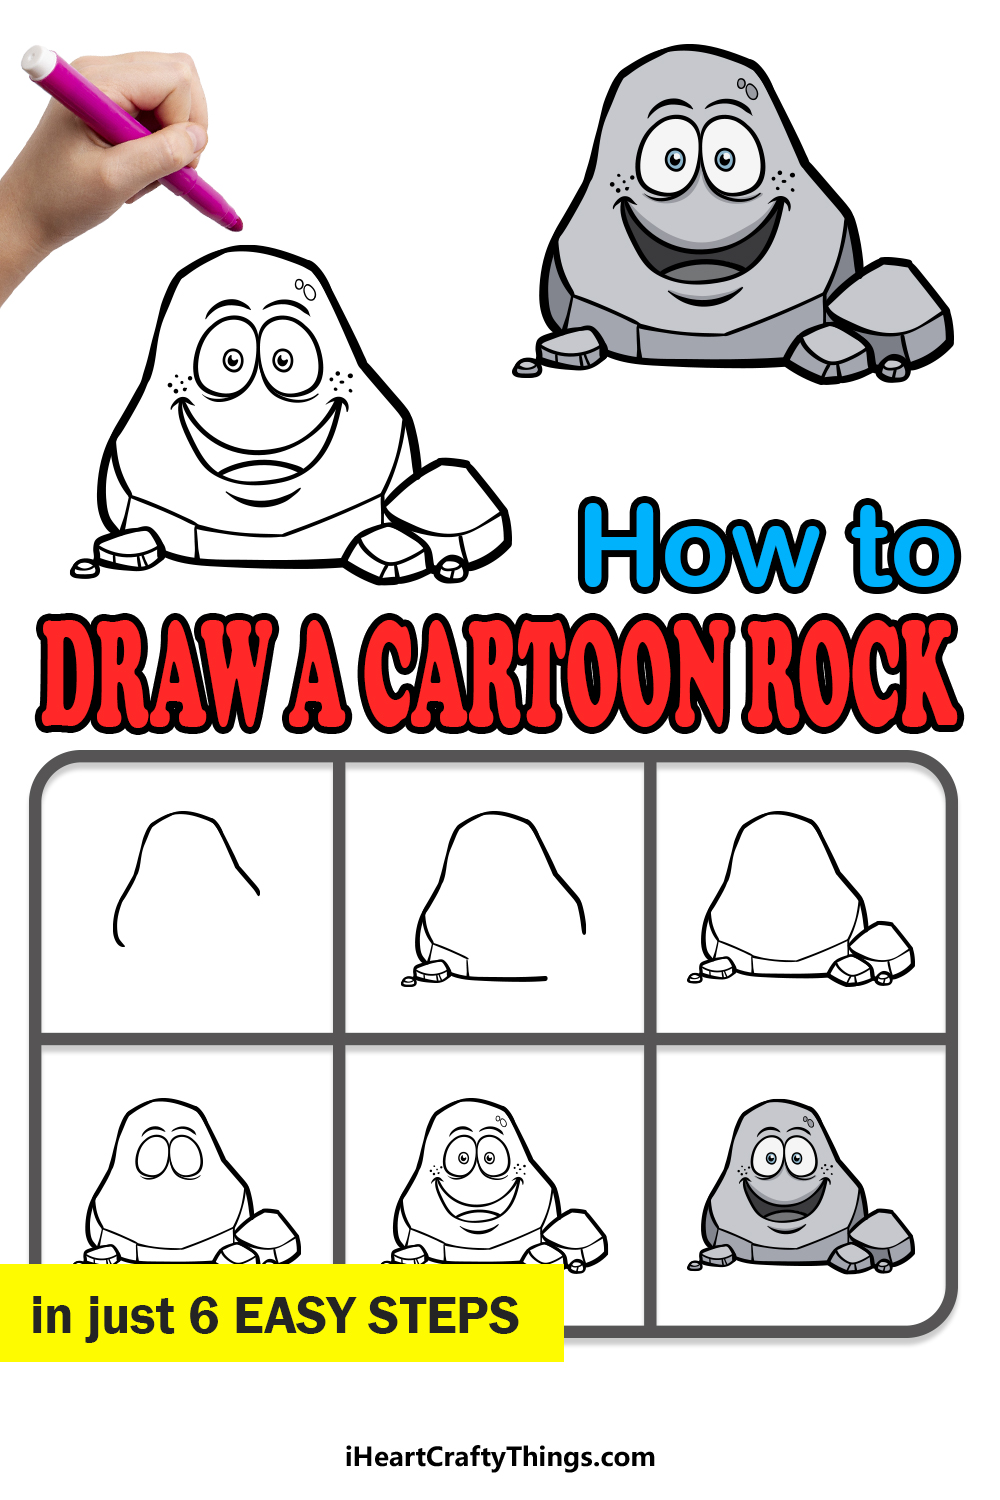 Cartoon Rock Drawing - How To Draw A Cartoon Rock Step By Step